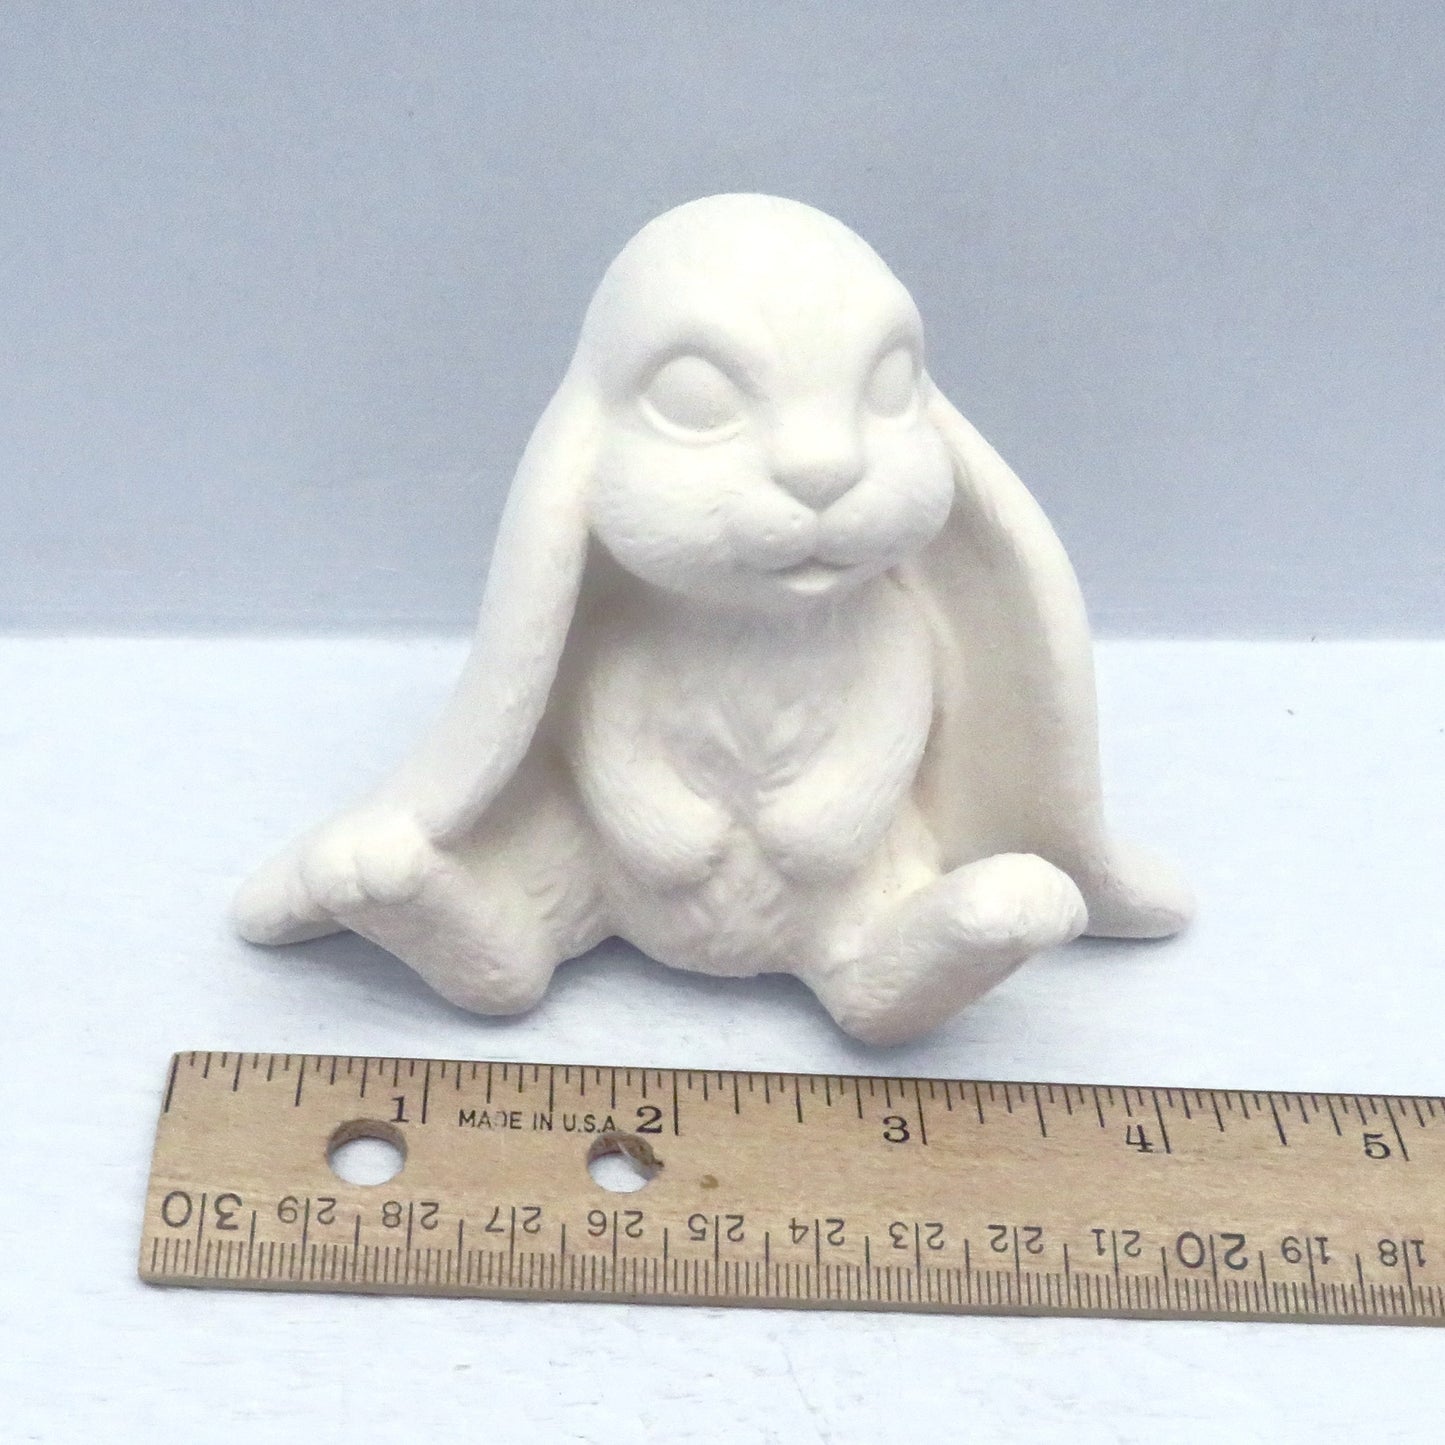 View looking down on unpainted bisque lop eared bunny near  ruler showing it to be approximately 4 1/8 inches wide